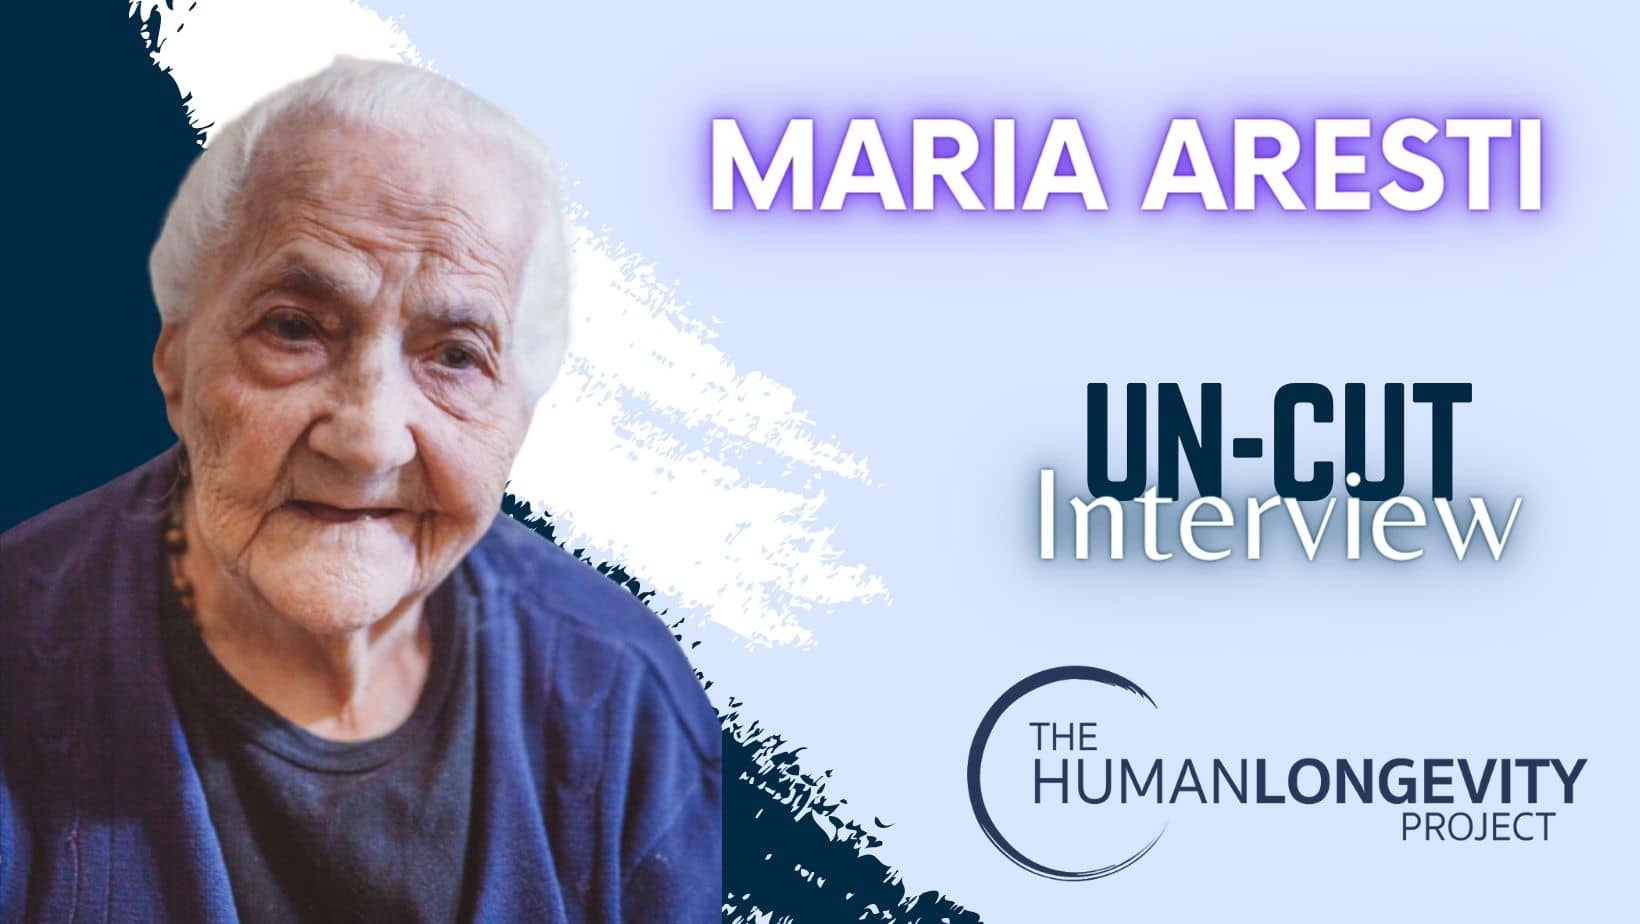 Human Longevity Project Uncut Interview With Maria Aresti